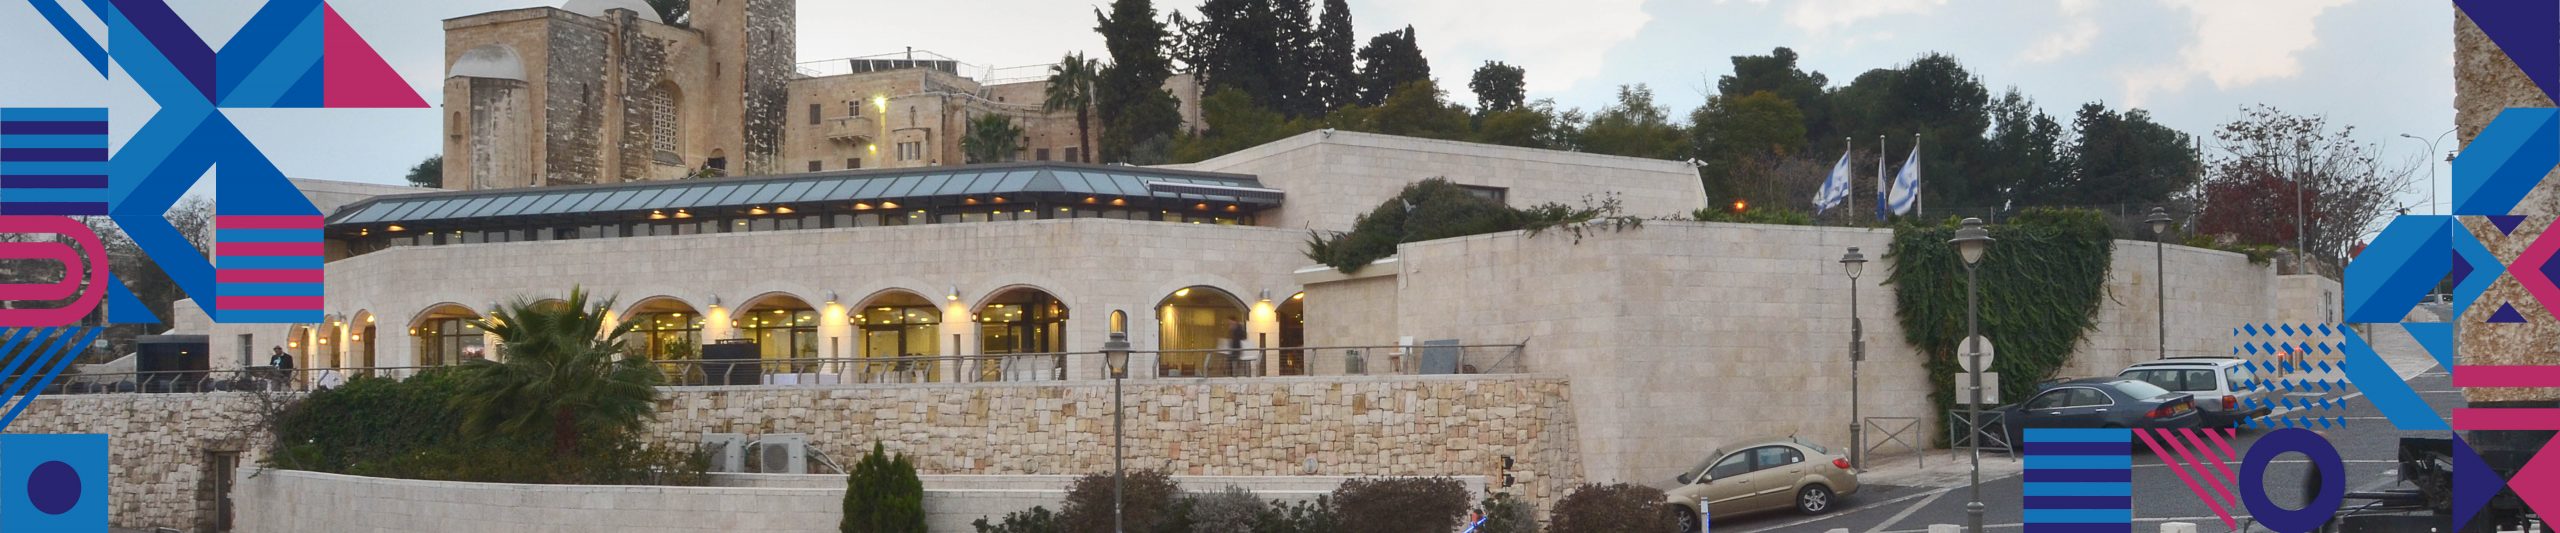 The First International Academic Conference on New Studies in Temple Mount Research